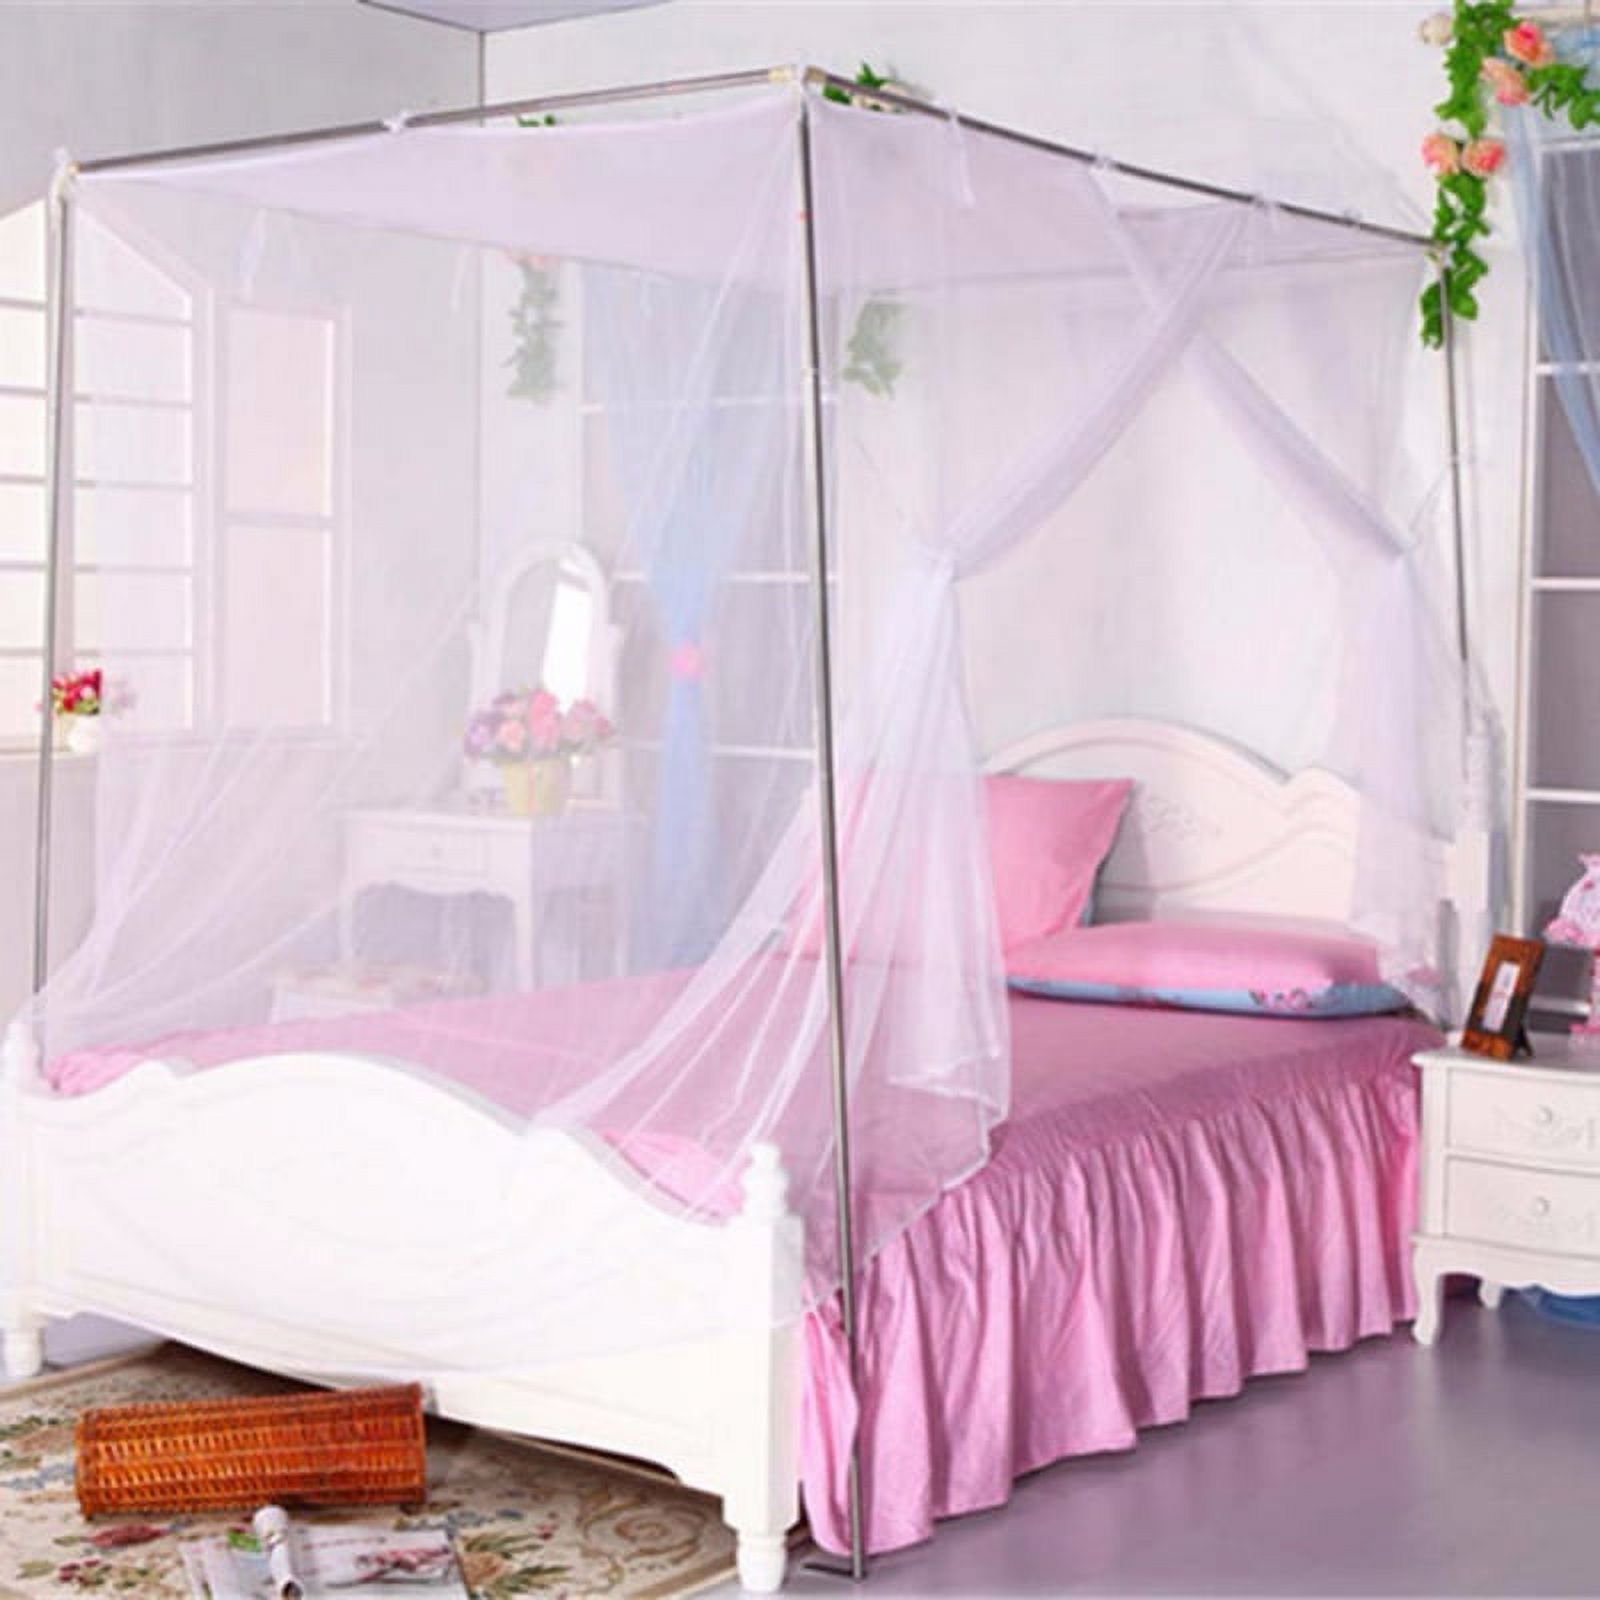 4 Poster Bed Canopy Functional Mosquito Insect Netting Fit Twin, Twin/full Bunk Bed, Full, Queen and King Bed - image 1 of 6